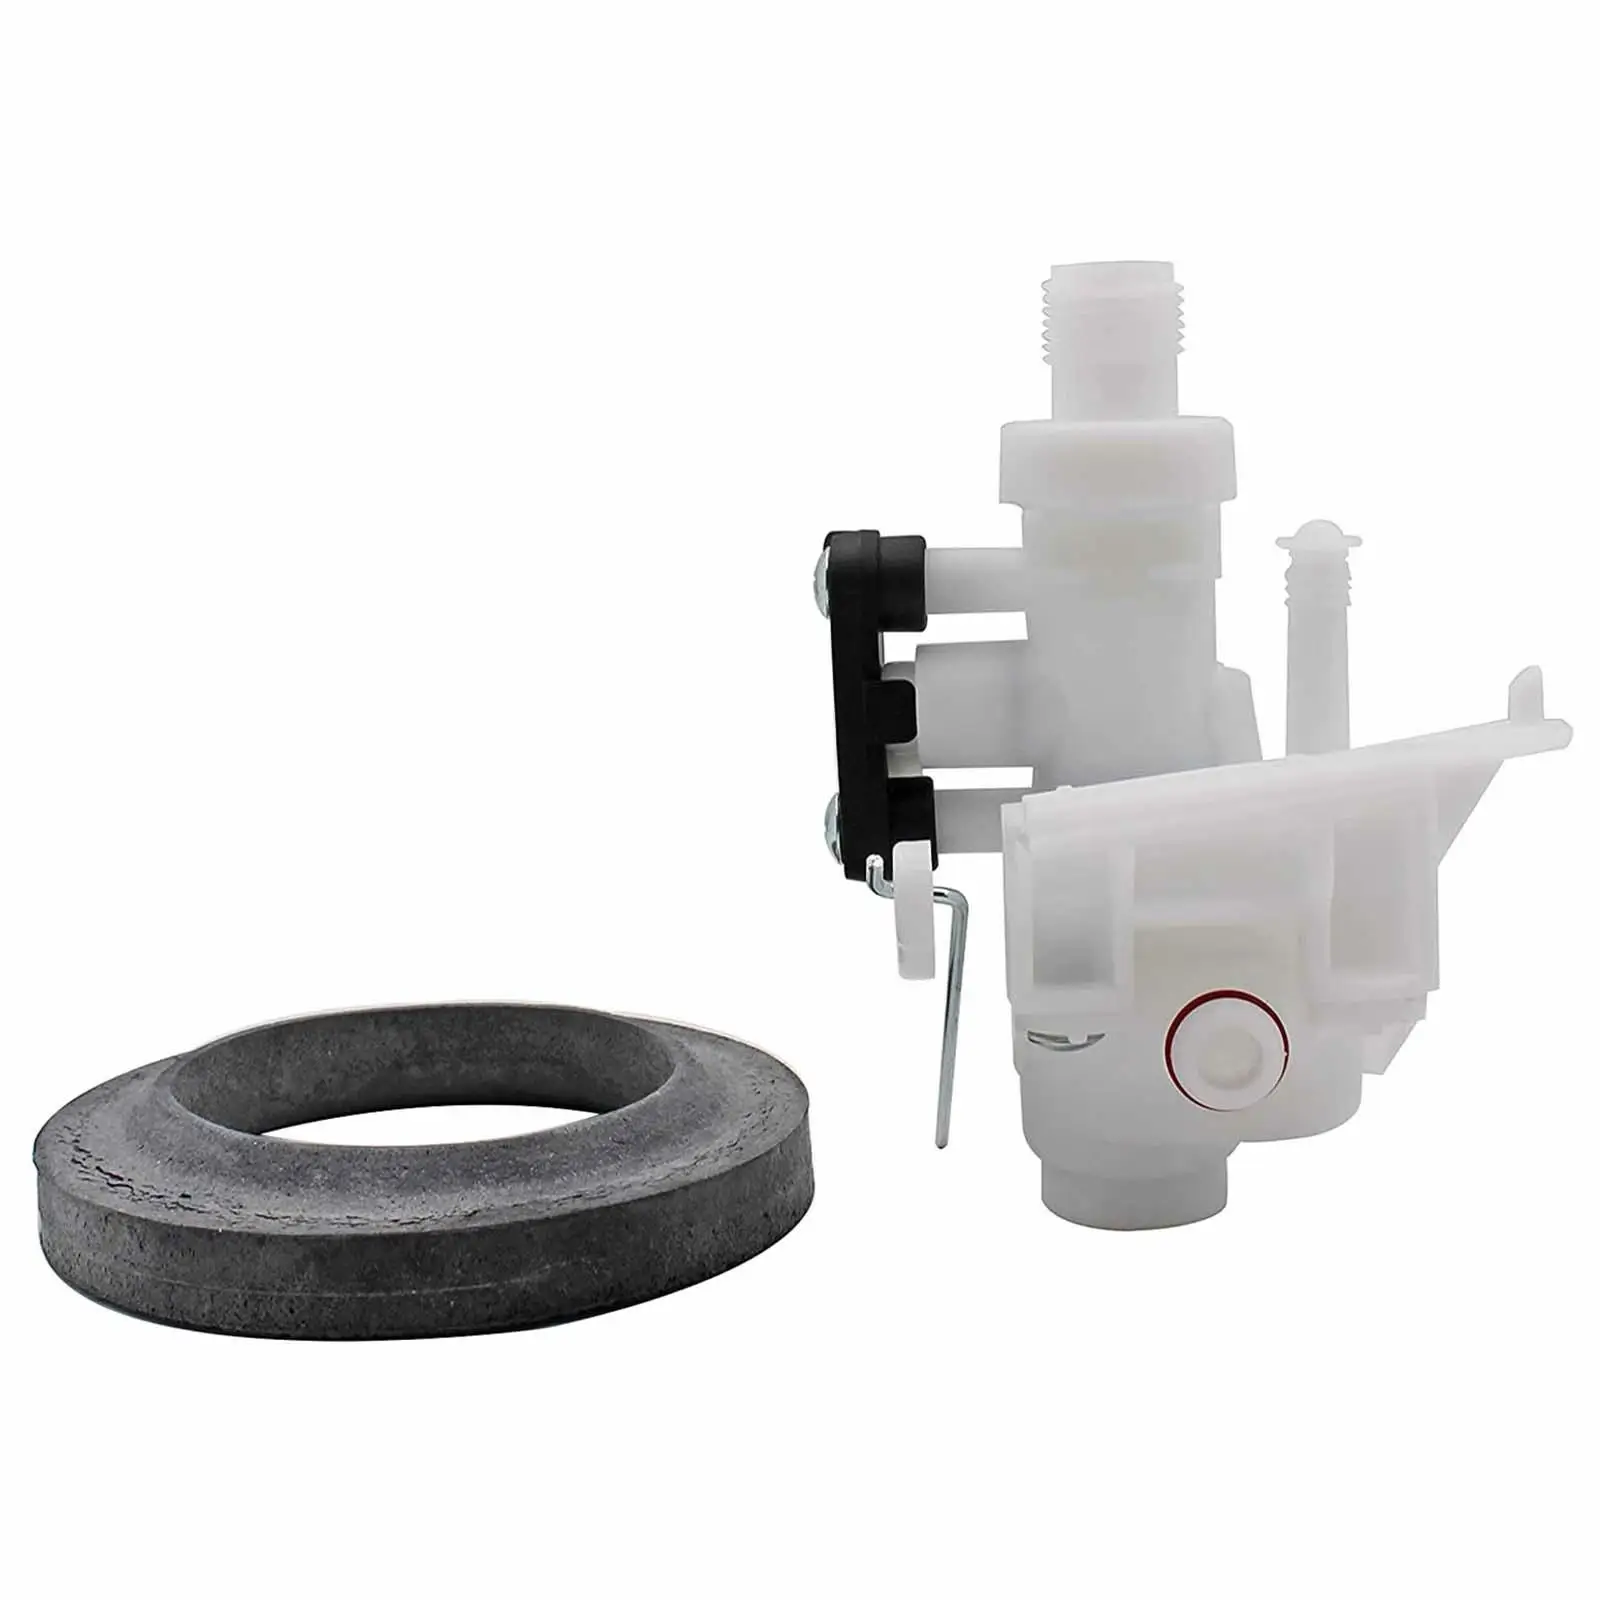 31705 Water Valve Easy to Install Upgraded Leak Resistant Toilet Water Valve for Camper RV Motor Home Accessory Replacements